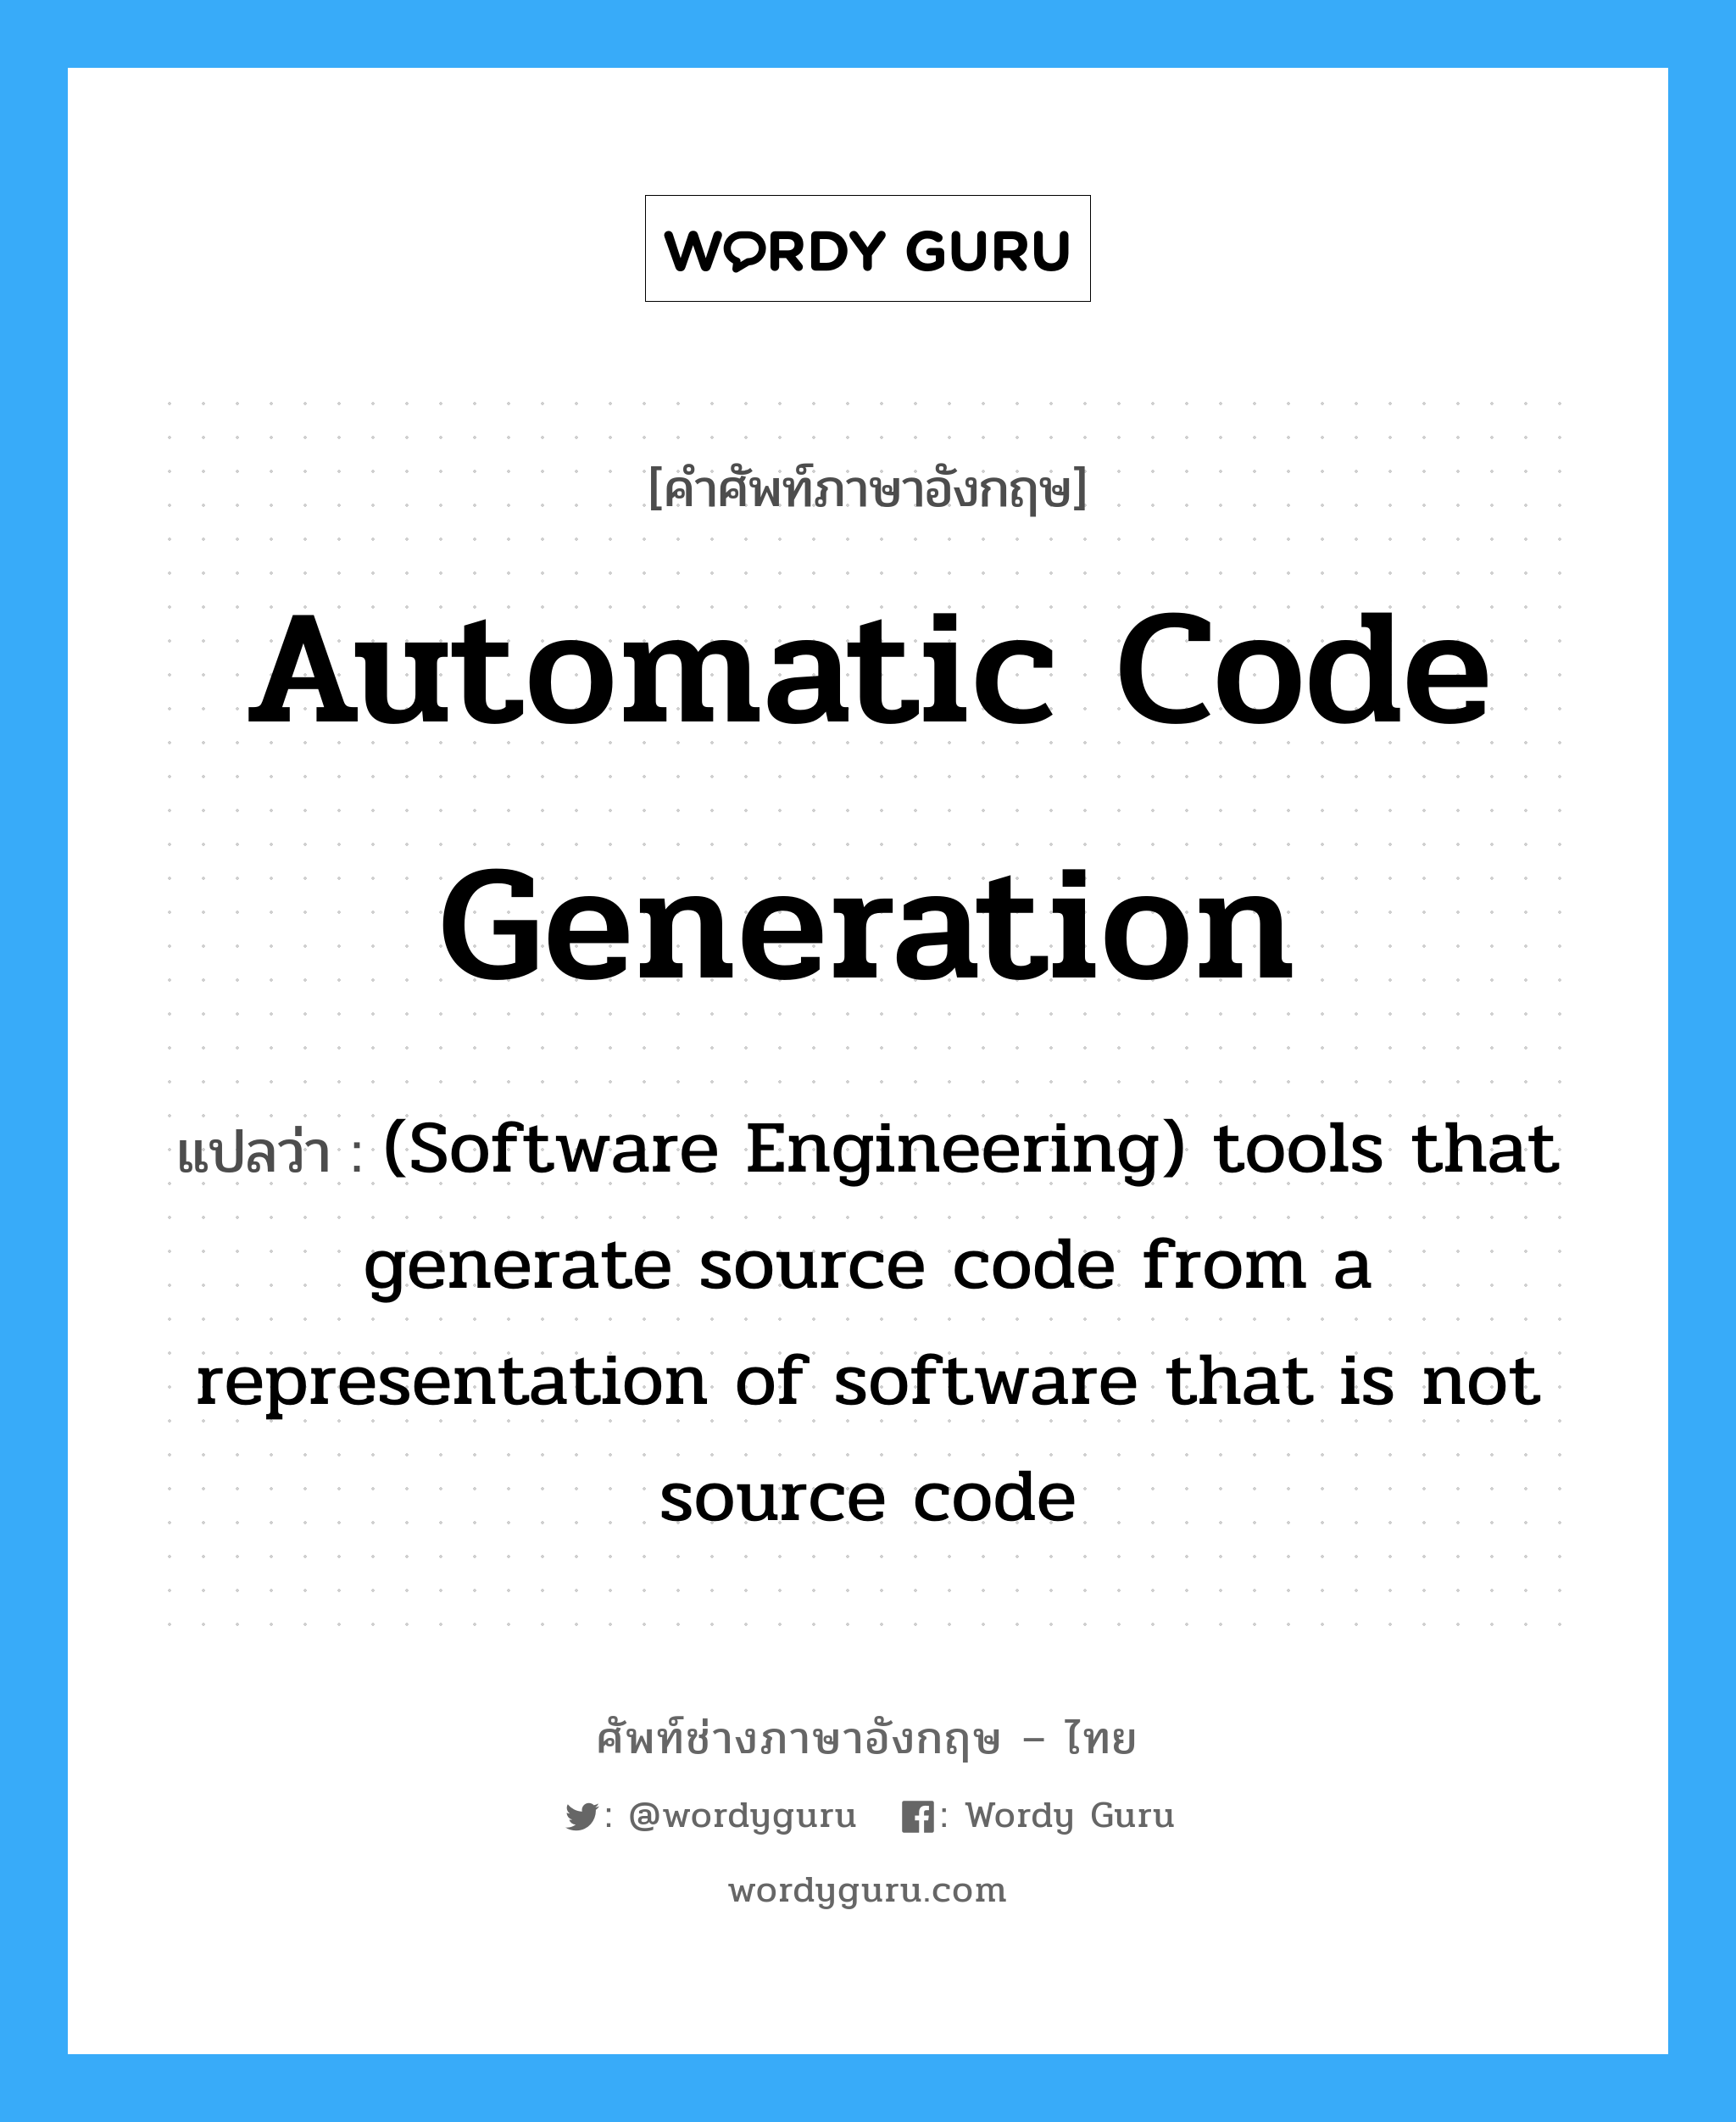 Automatic code generation แปลว่า?, คำศัพท์ช่างภาษาอังกฤษ - ไทย Automatic code generation คำศัพท์ภาษาอังกฤษ Automatic code generation แปลว่า (Software Engineering) tools that generate source code from a representation of software that is not source code